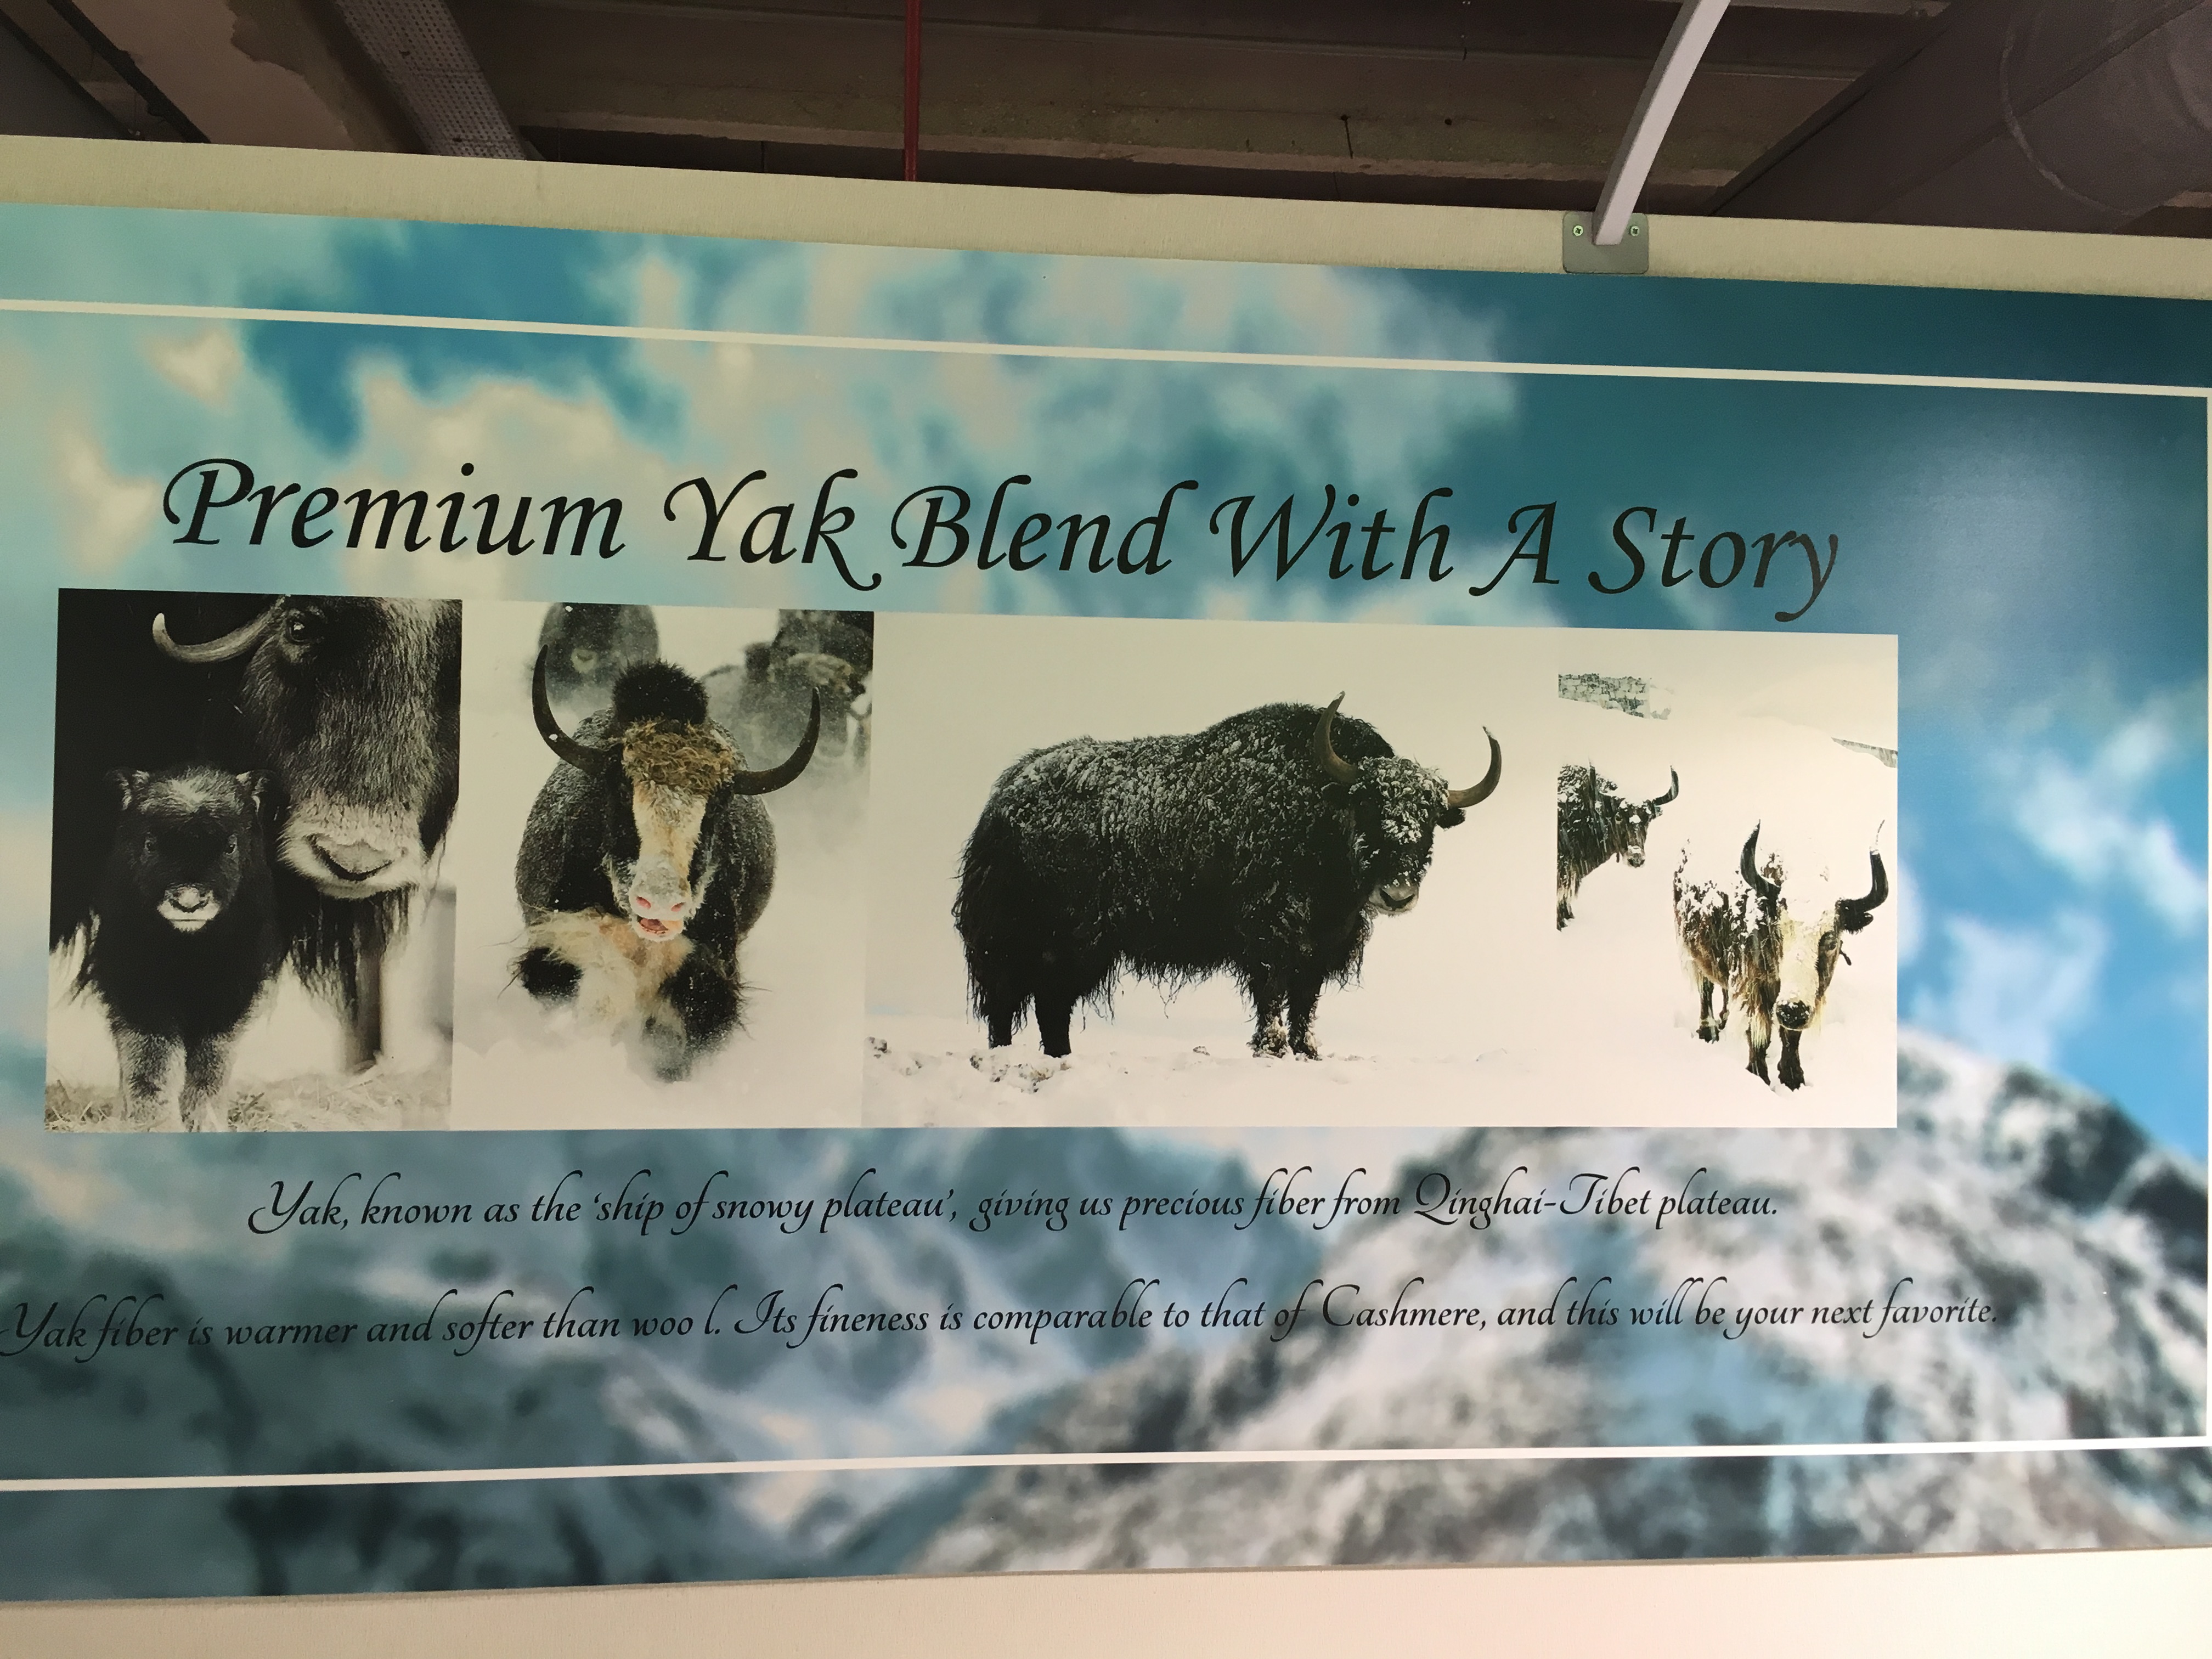 Yak blend yarns featured at Esquel Group.